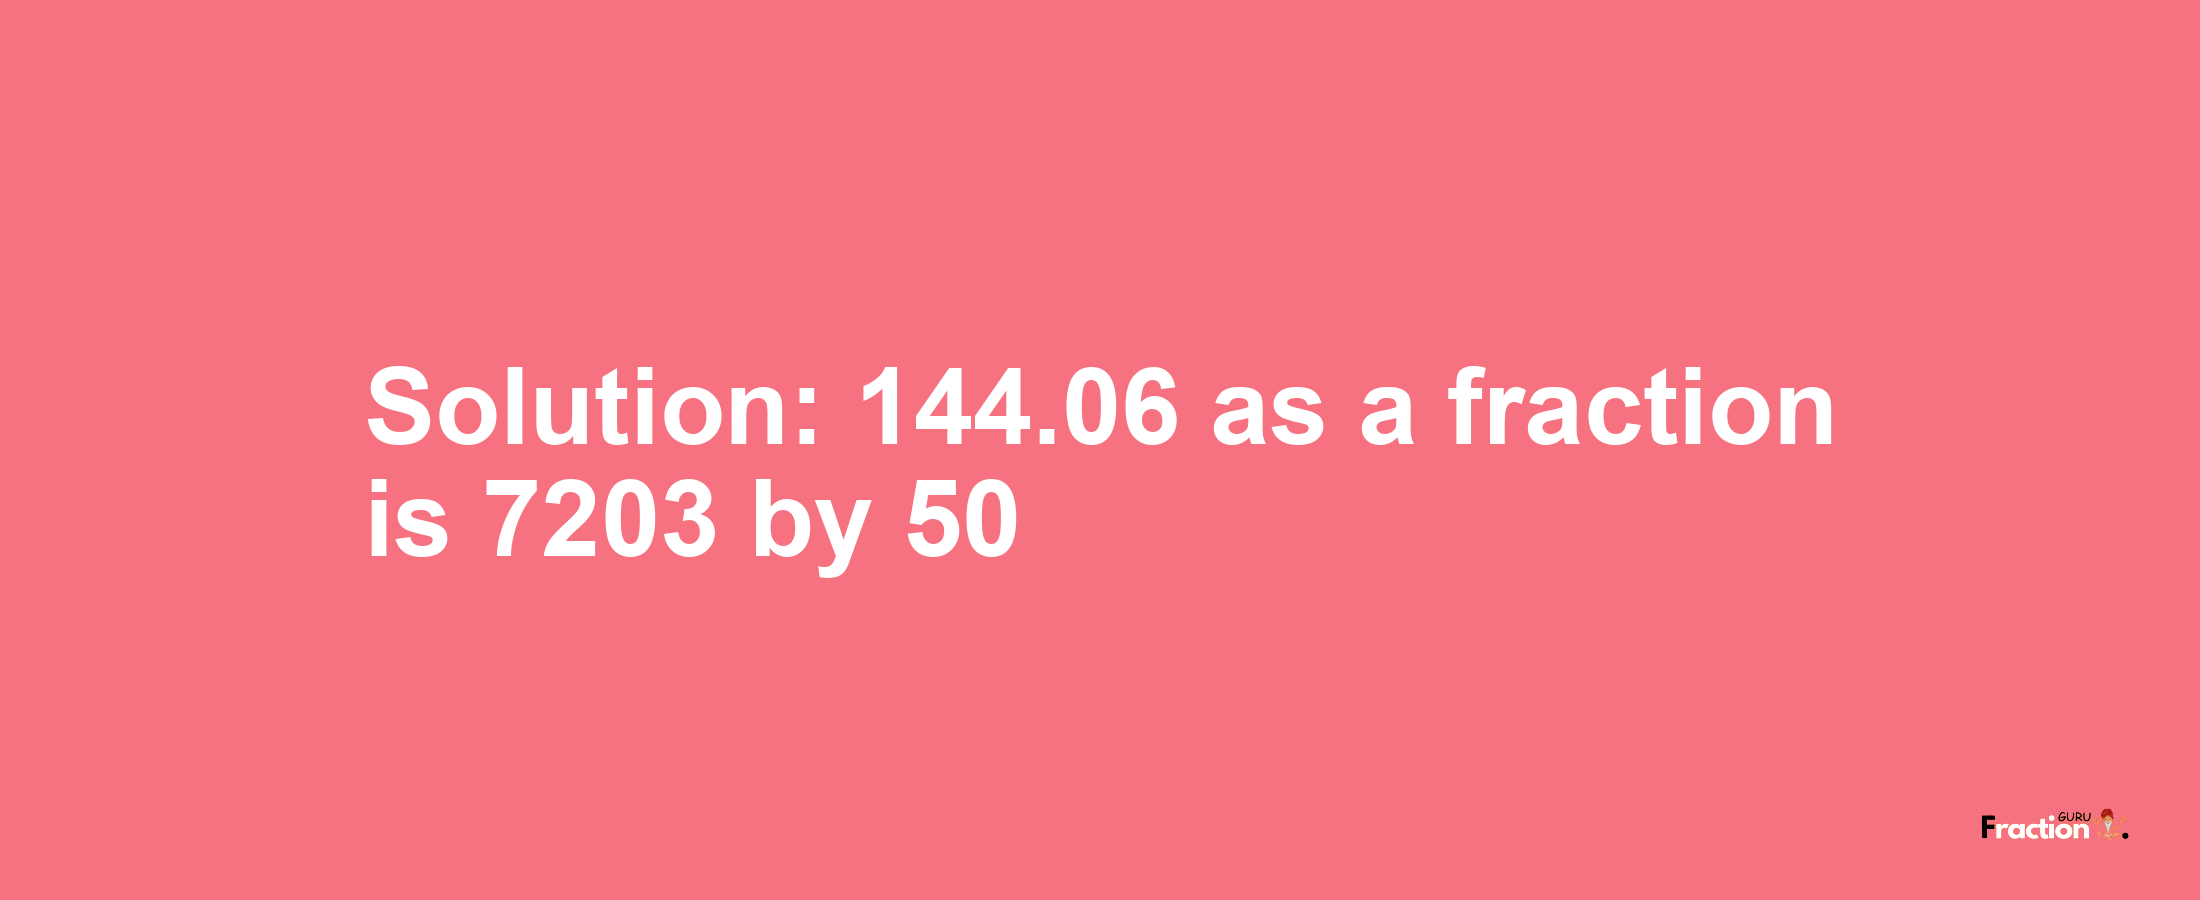 Solution:144.06 as a fraction is 7203/50